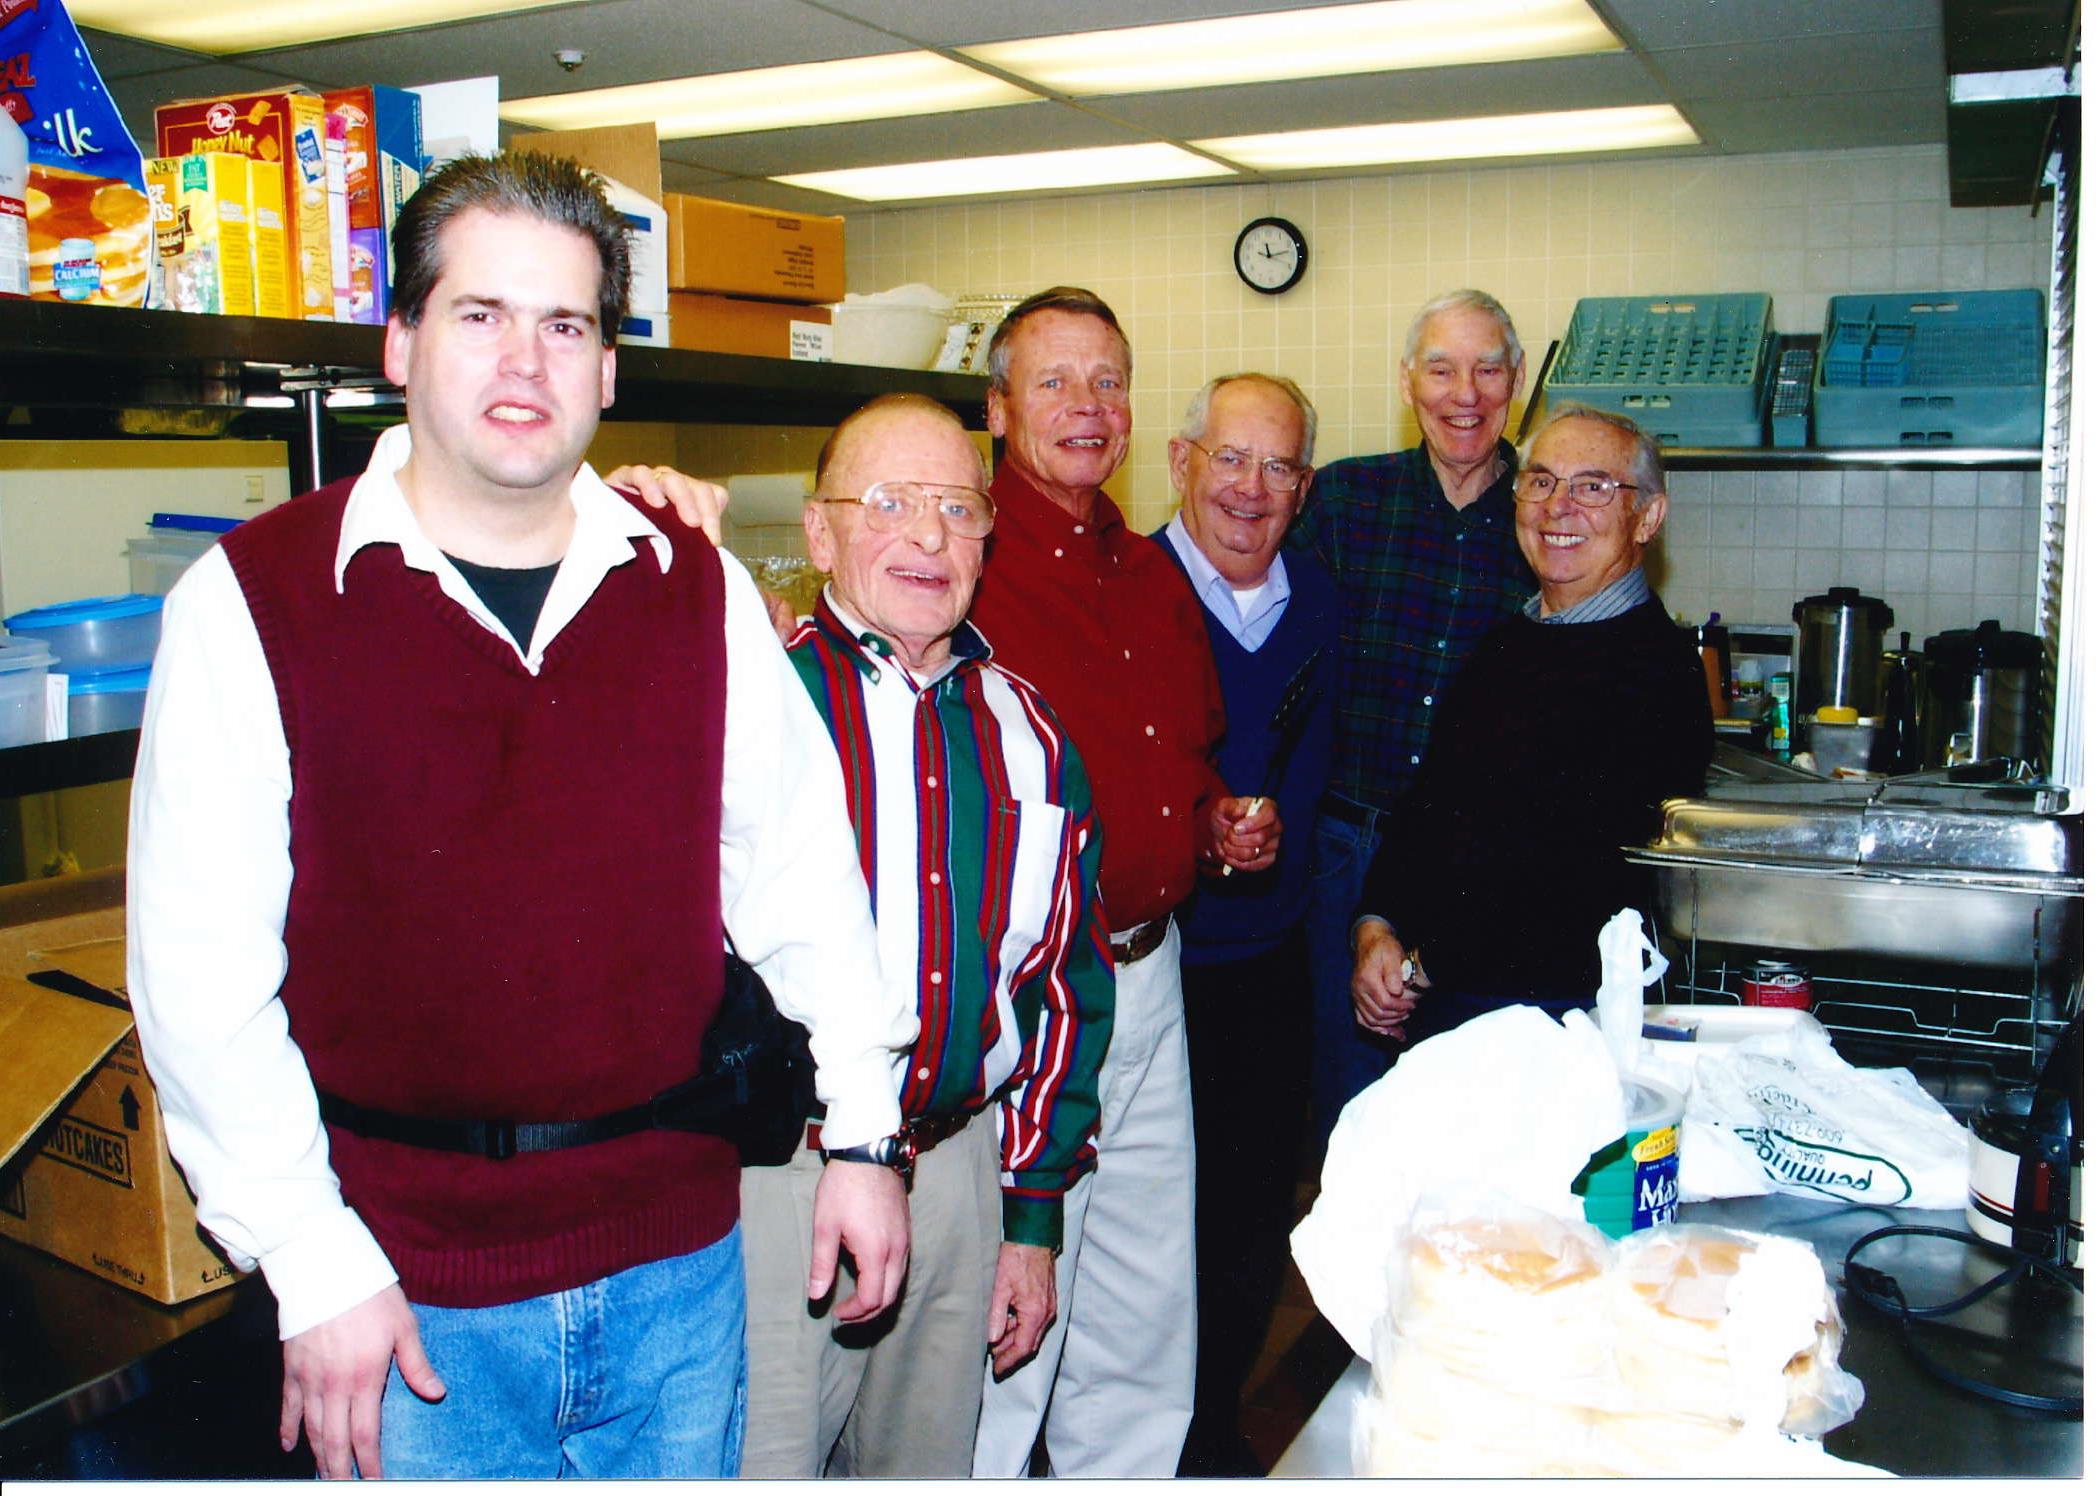 Kiwanis Club of Hopewell Valley-Pennington having a fundraiser at the Hopewell United Methodist Church in the early 2000s.